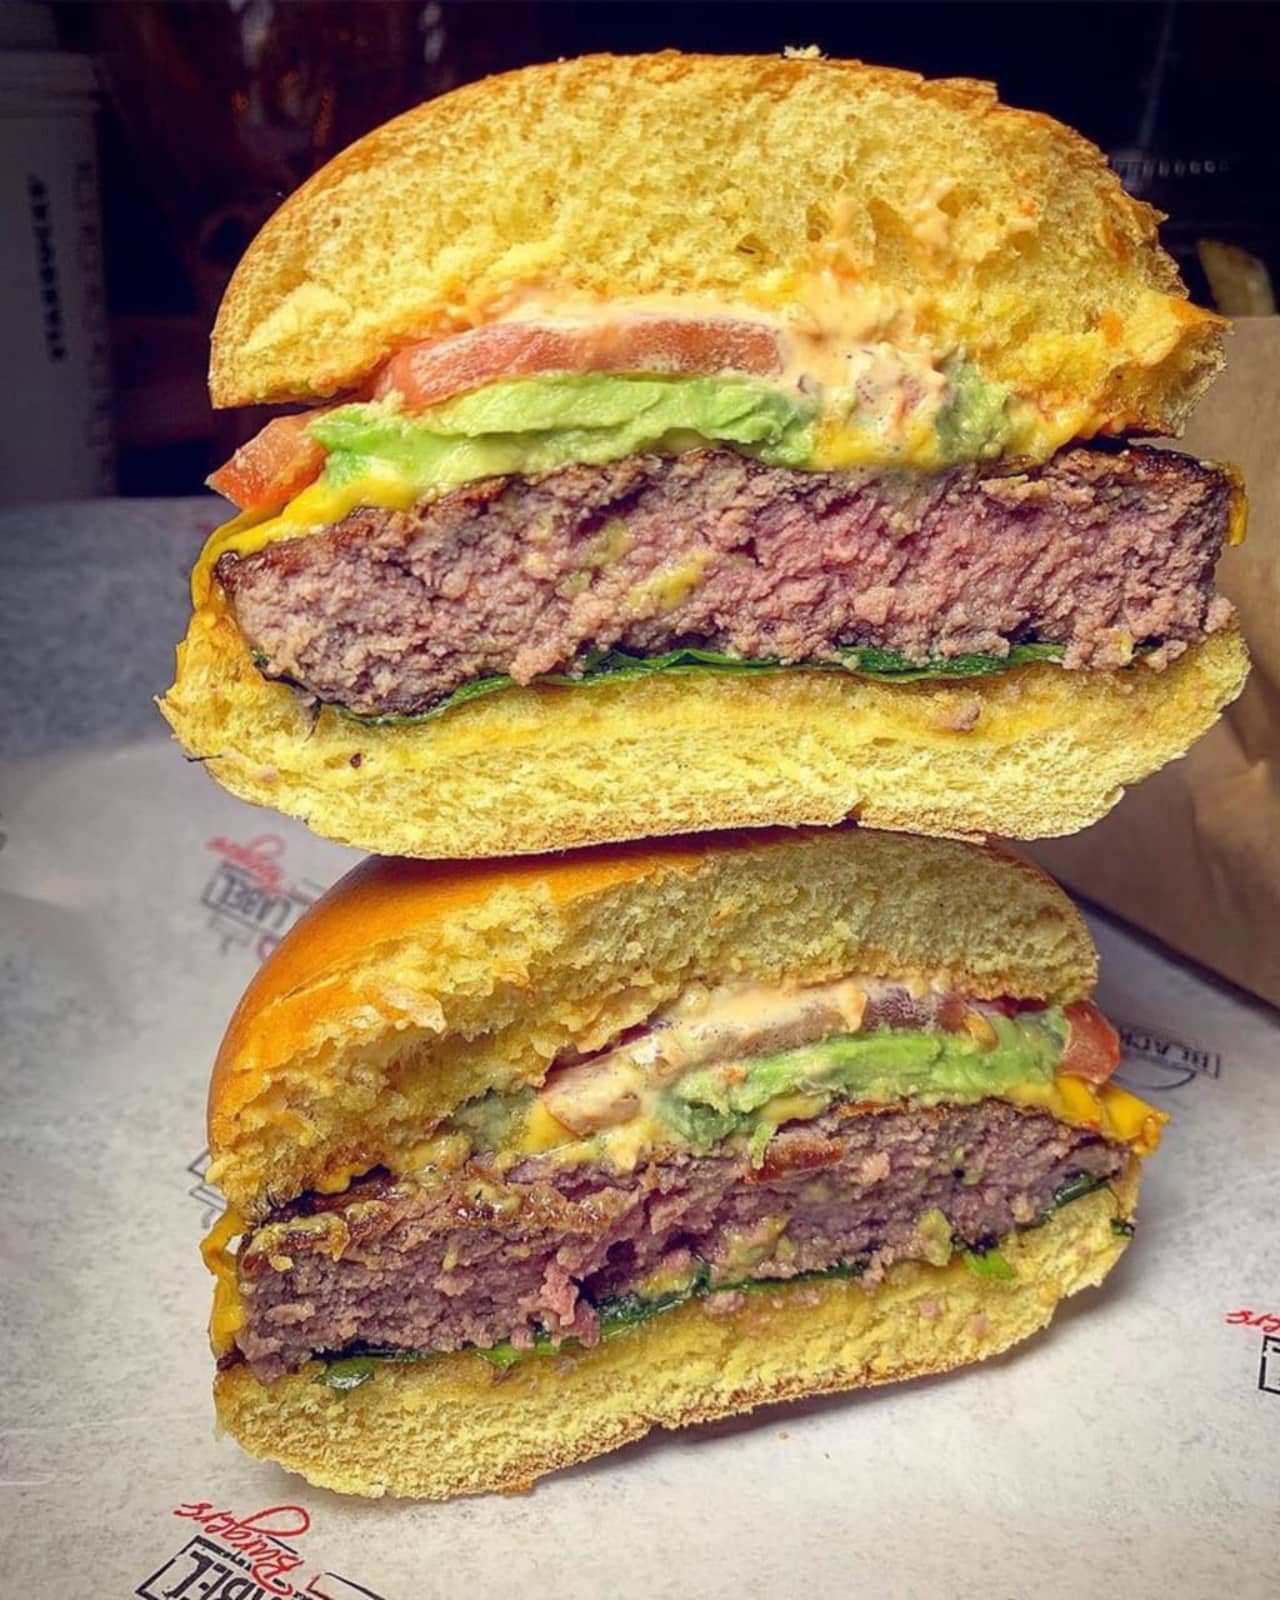 Black Label burger with American cheese, lettuce, tomato, onion and label sauce (avocado added) from Black Label Burgers, located at 683 Old Country Road in Westbury